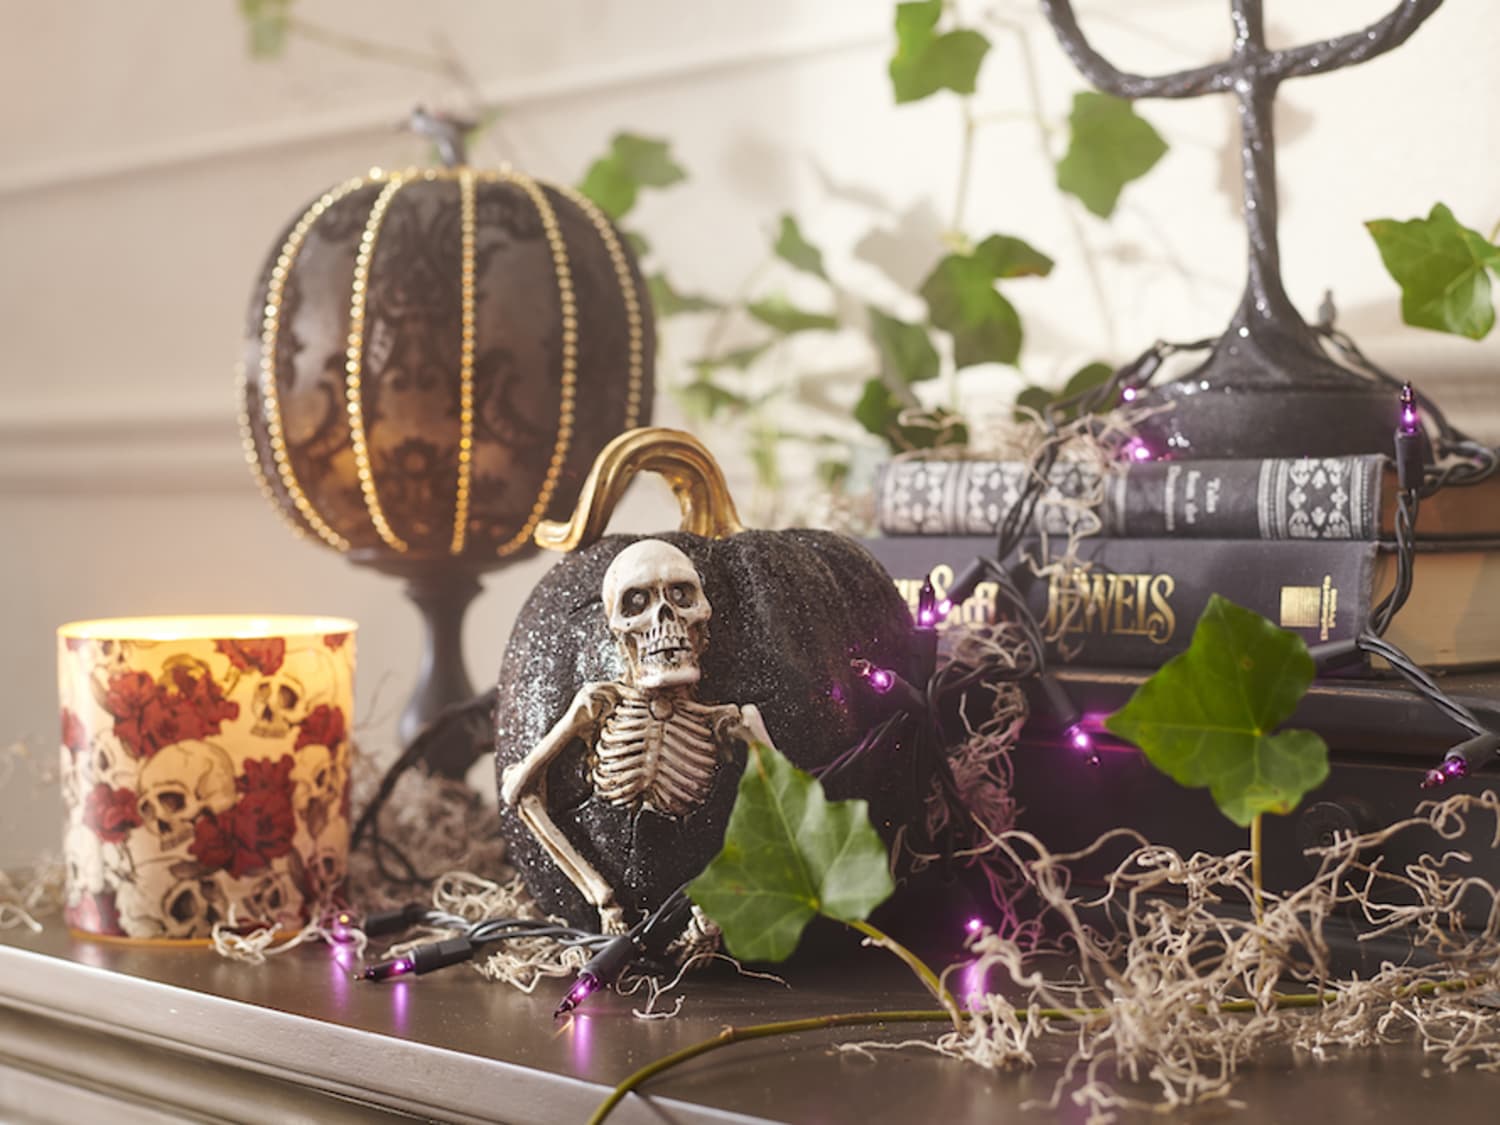 Big Lots Releases Halloween Collection 2020 | Apartment Therapy